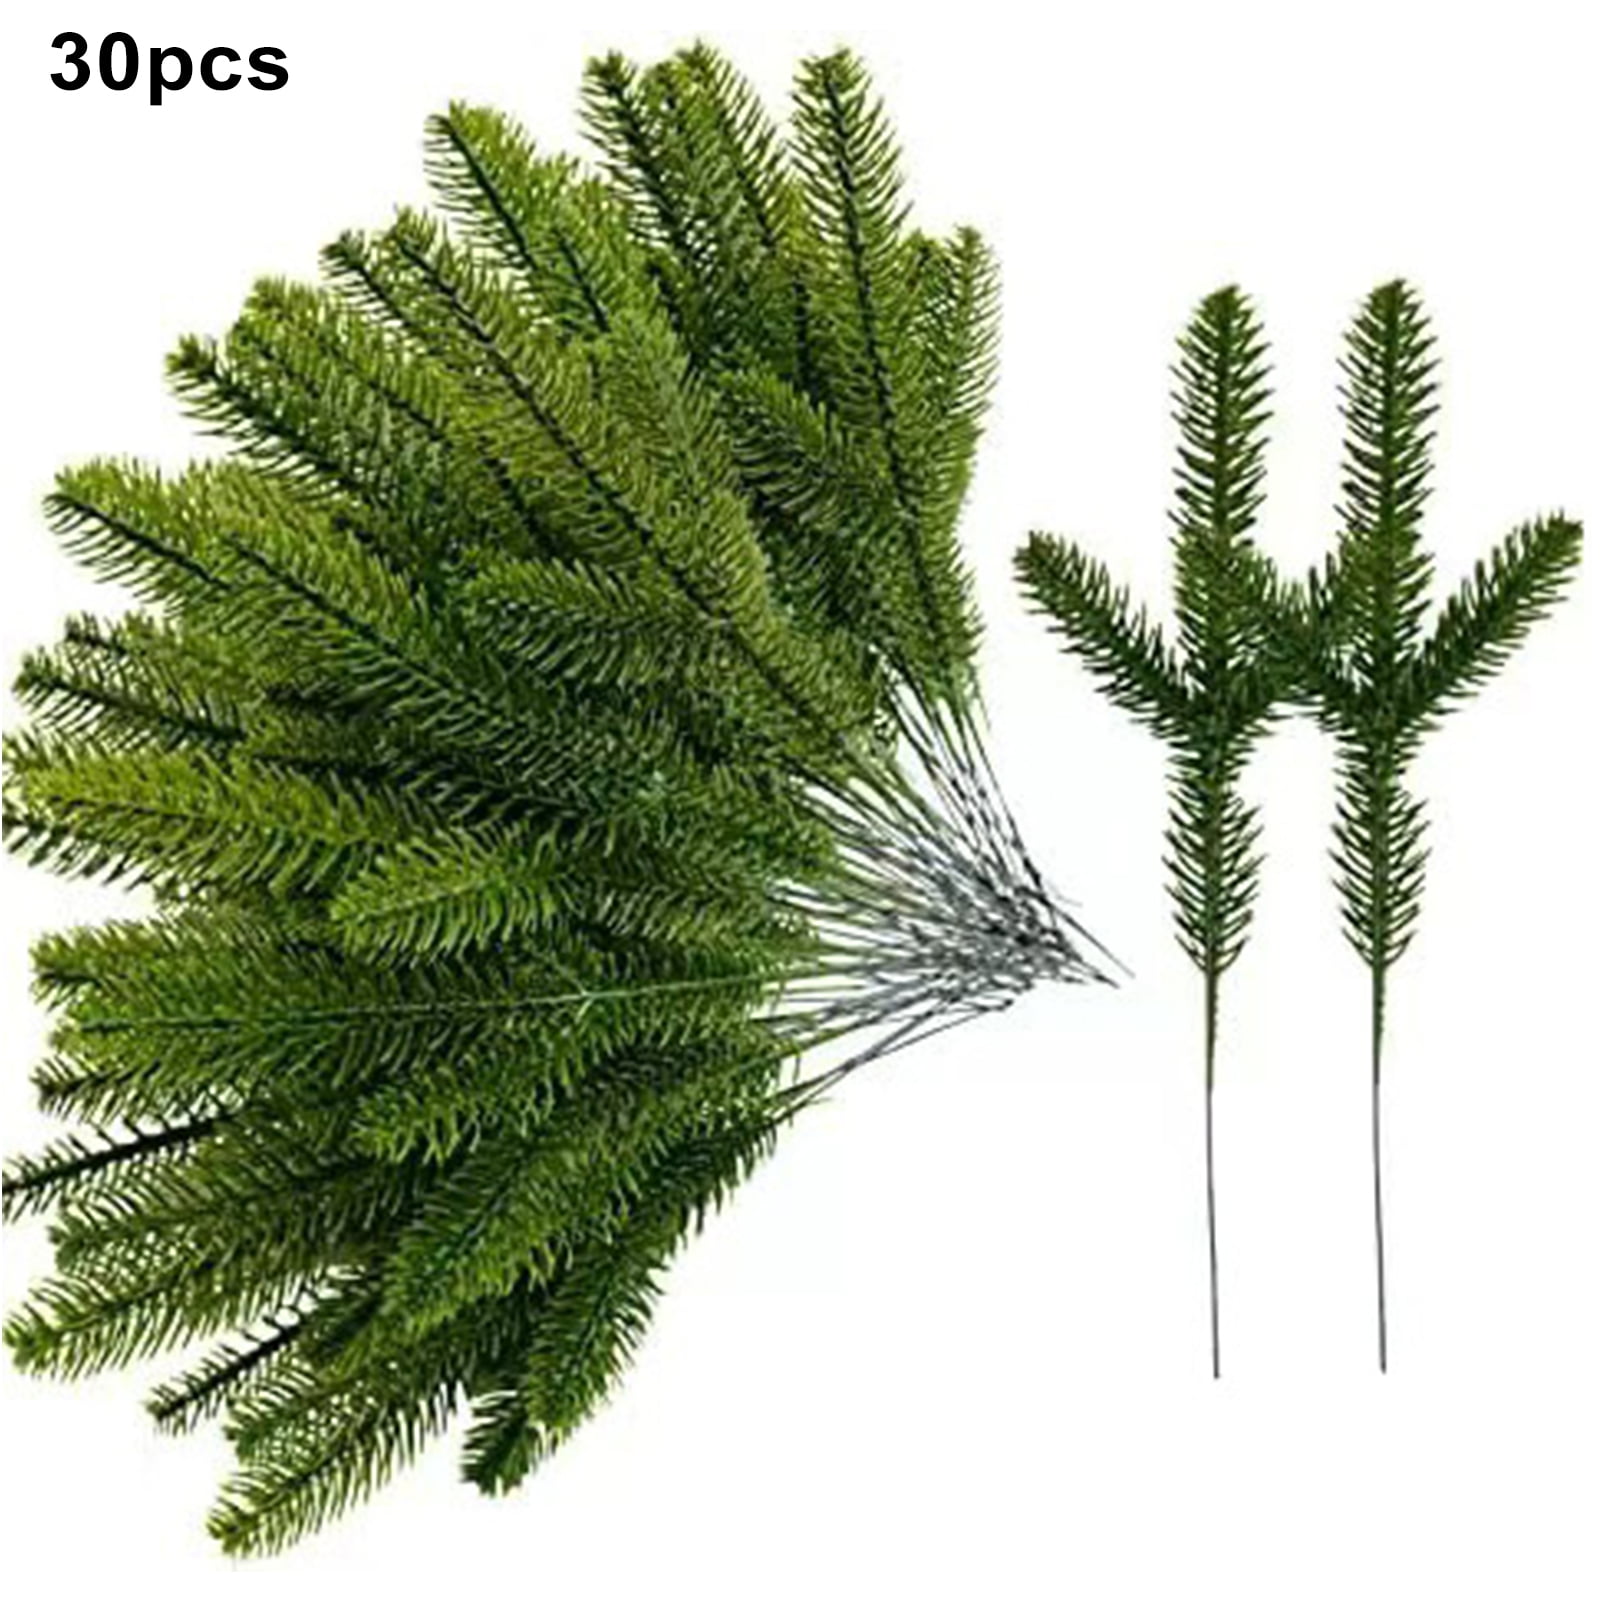 wirlsweal Long Lasting Faux Pine Branch 30pcs Realistic Artificial Pine  Branches for Diy Crafts Home Decor Durable Faux Pine Needles for Christmas